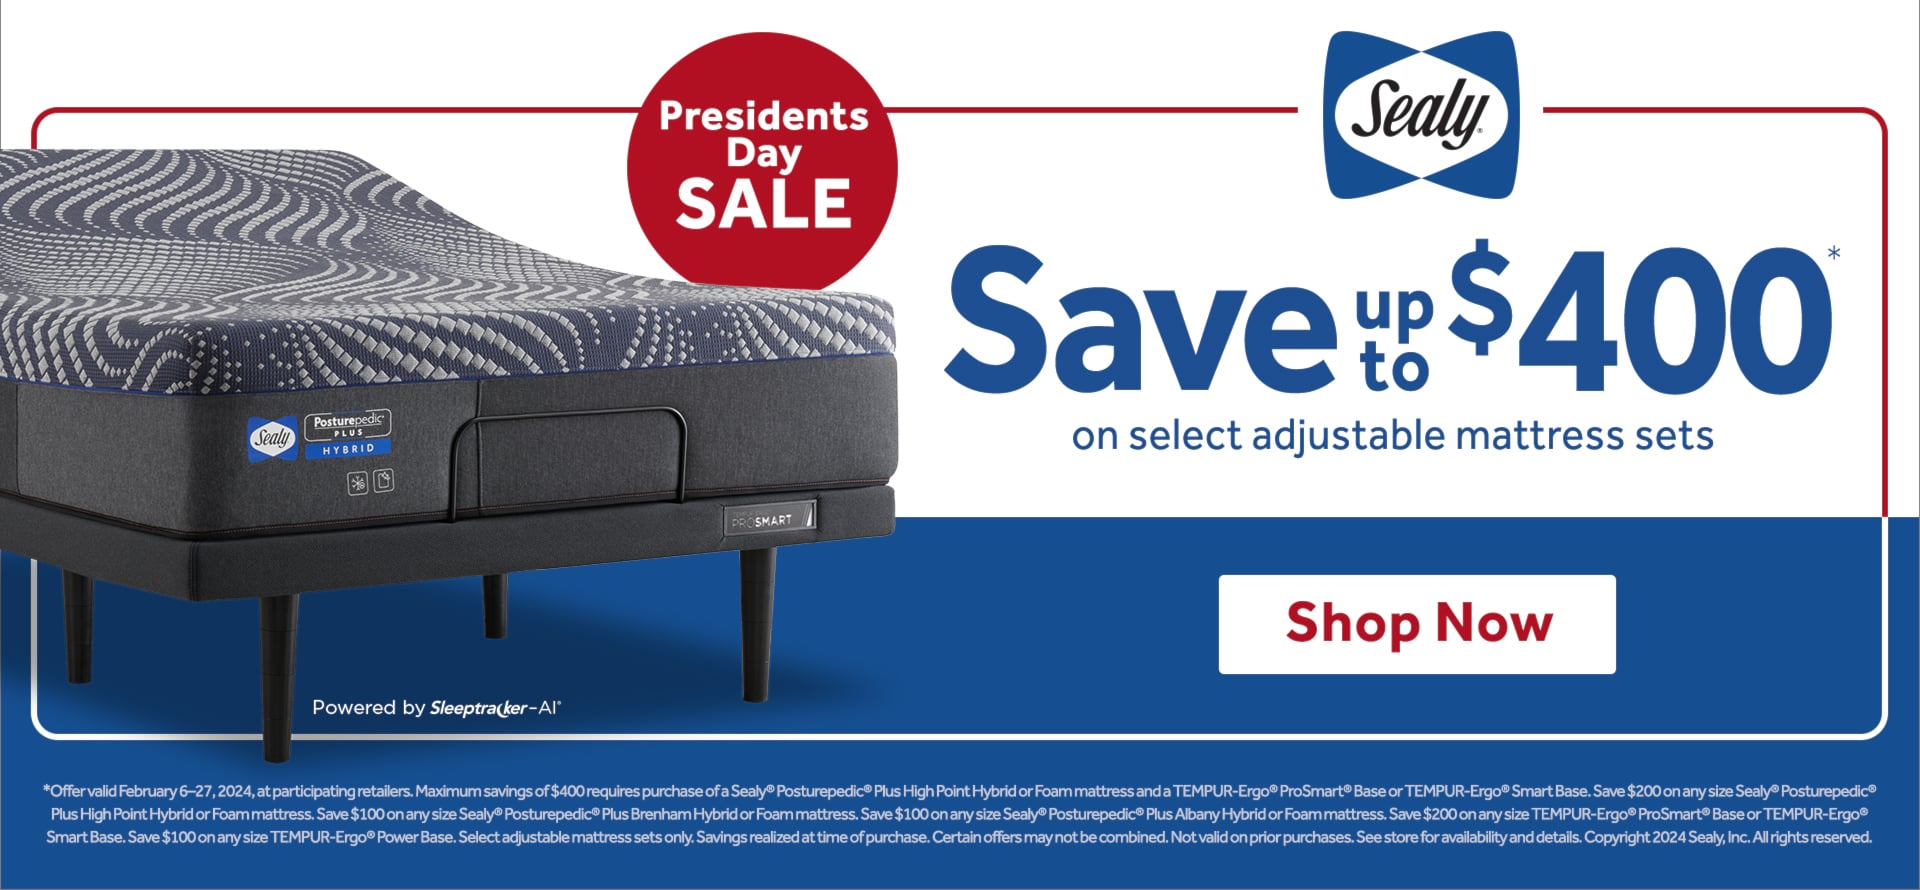 Save up to $400 on Select Sealy adjustable sets